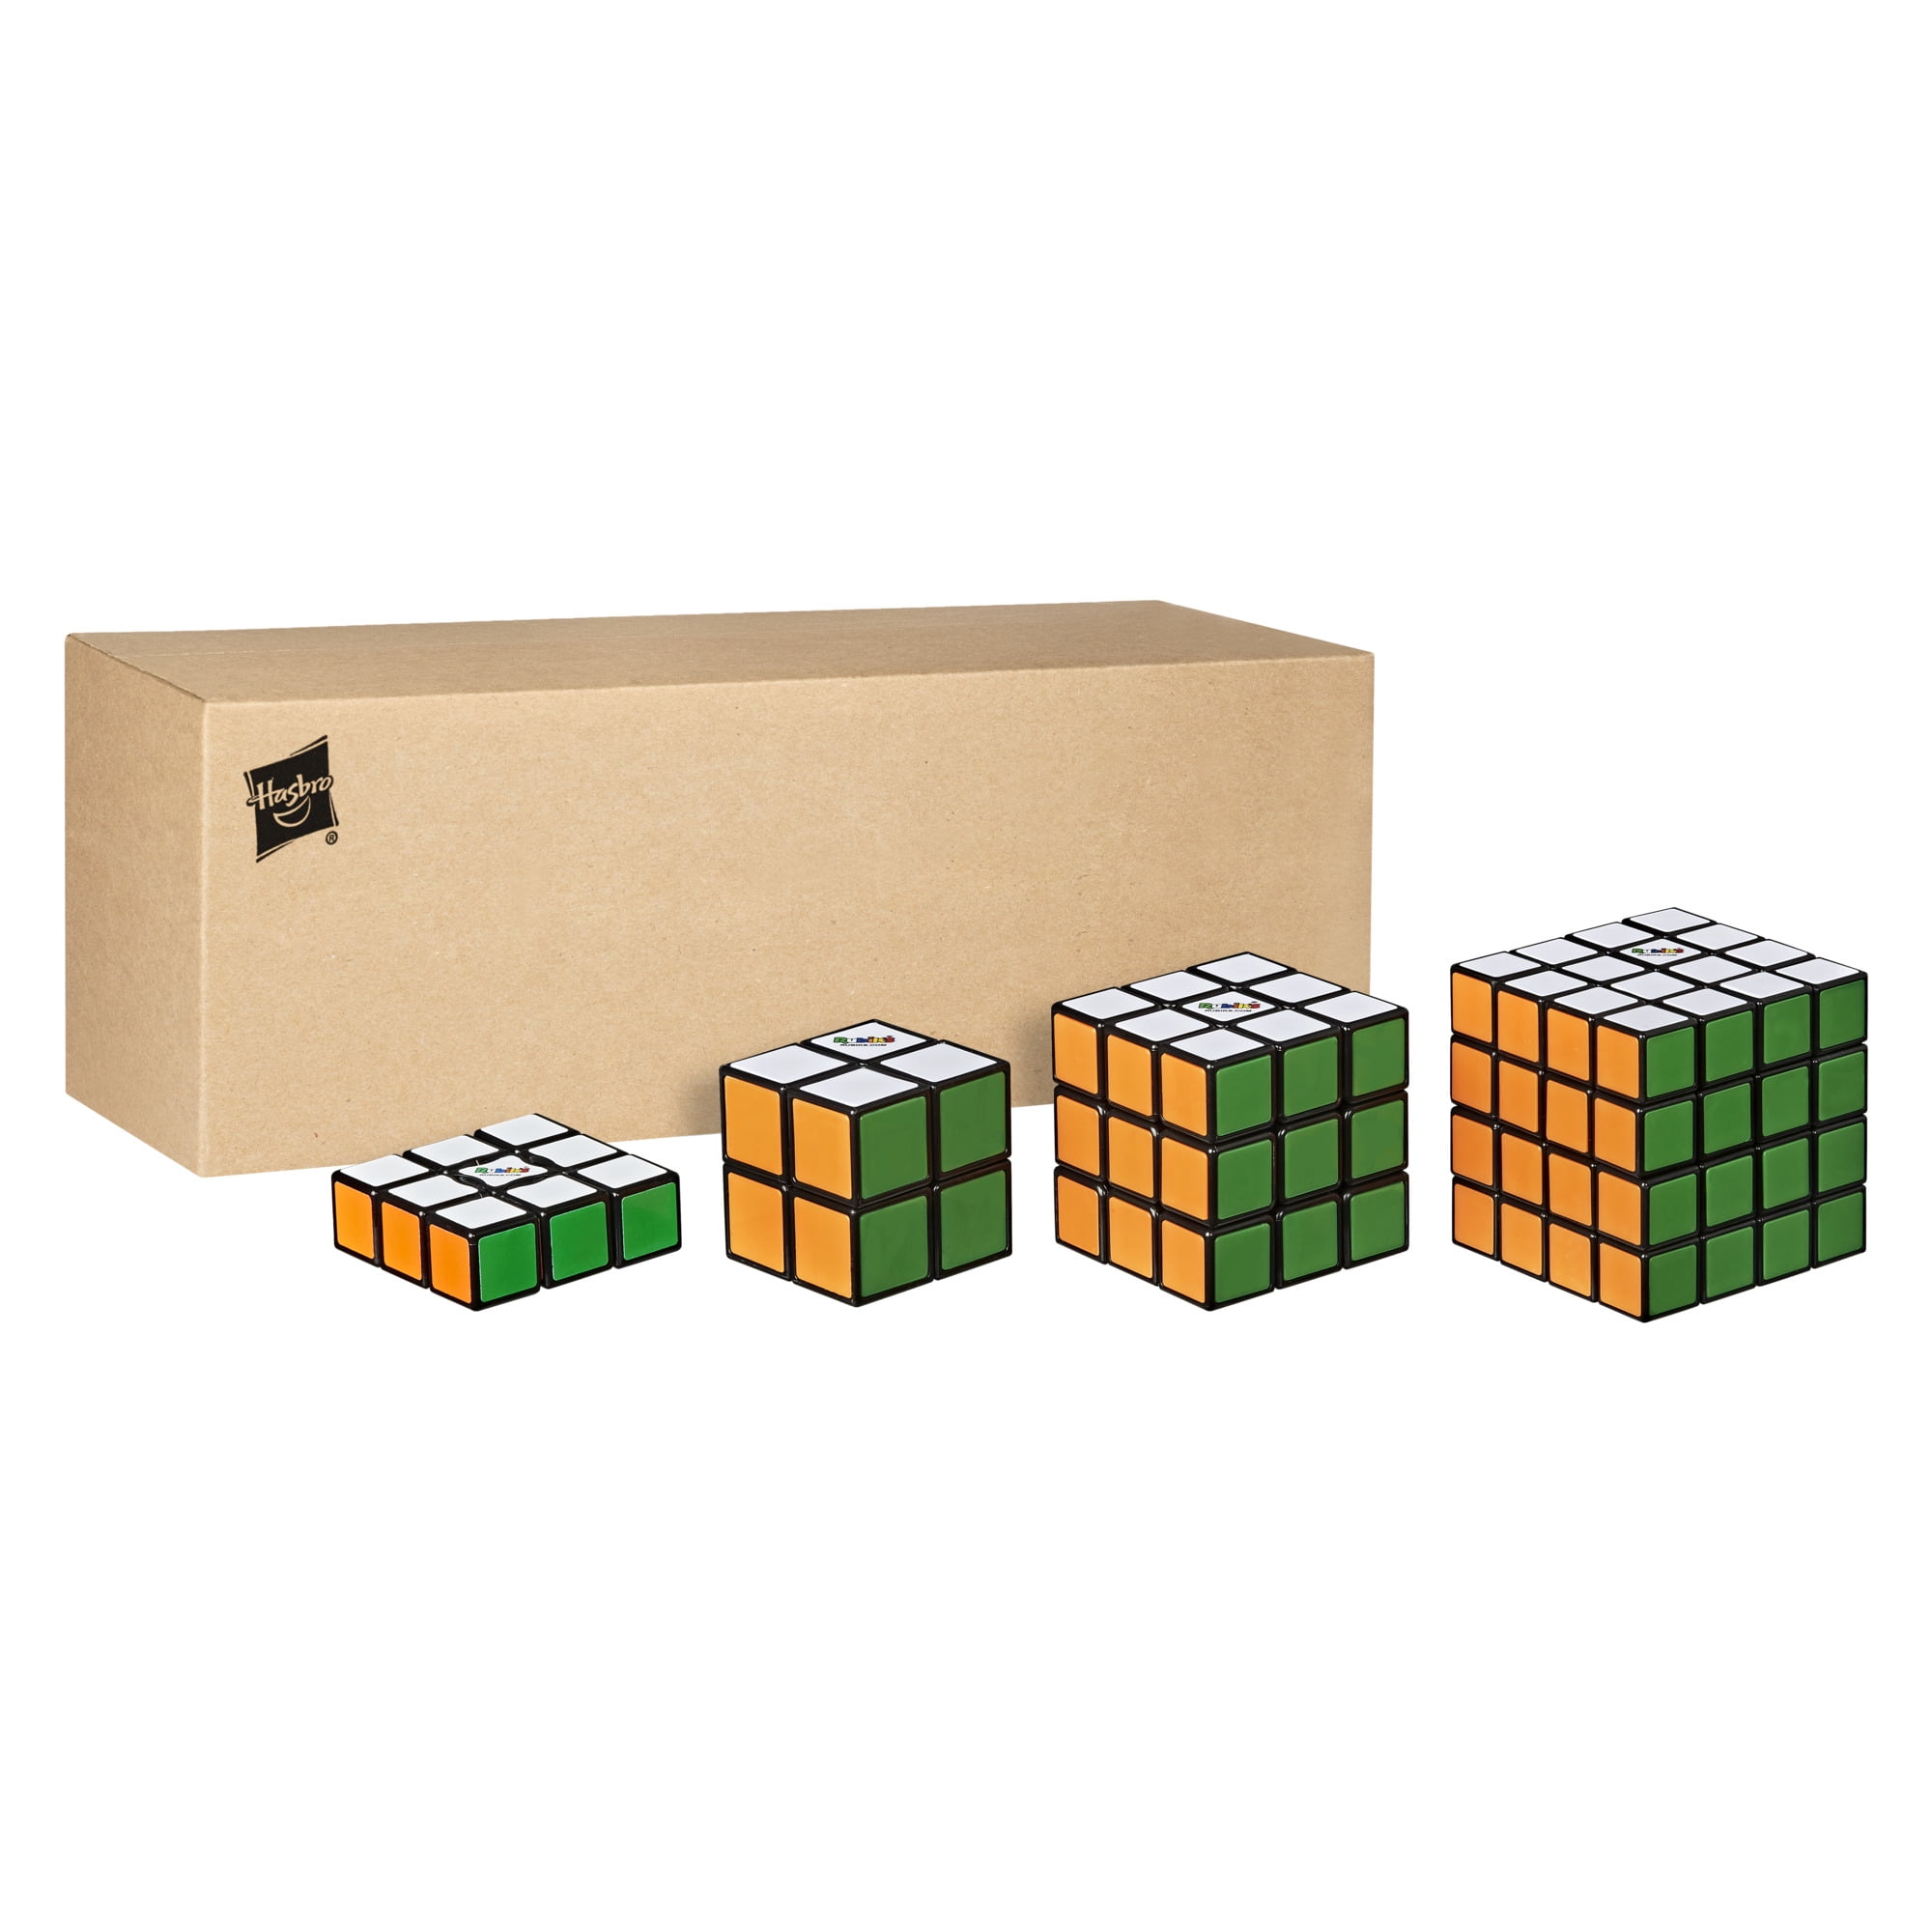 Southern Denmark Geometry Rubik's Solve the Cube Bundle 4 Pack, Toy for Kids Ages 8 and Up -  Walmart.com